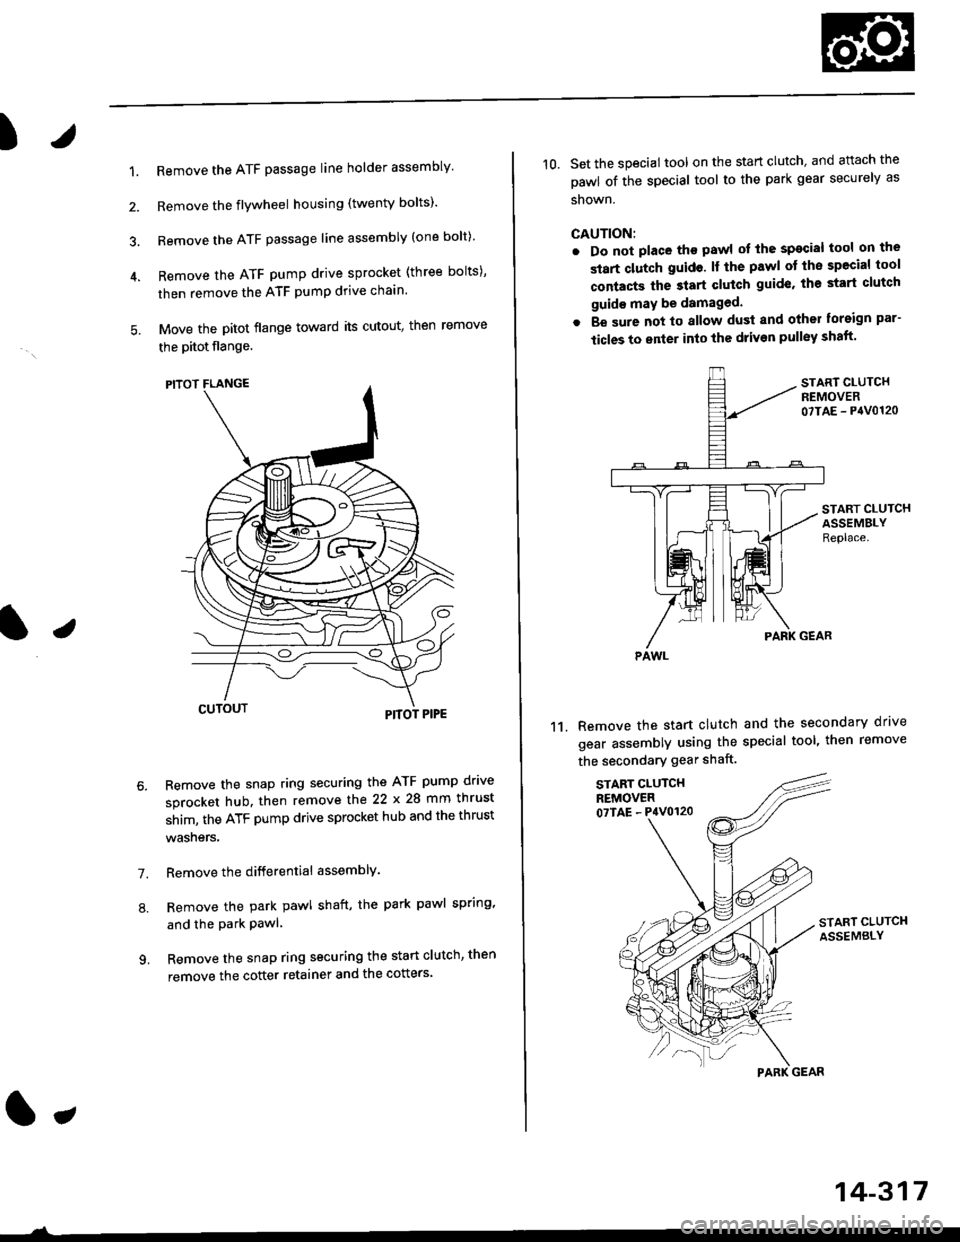 HONDA CIVIC 1996 6.G Workshop Manual )
1.Remove the ATF passage line holder assembly
Remove the flywheel housing (twenty bolts)
Remove the ATF passage line assembly (one bolt)
Remove the ATF pump drive sprocket (three bolts),
then remo